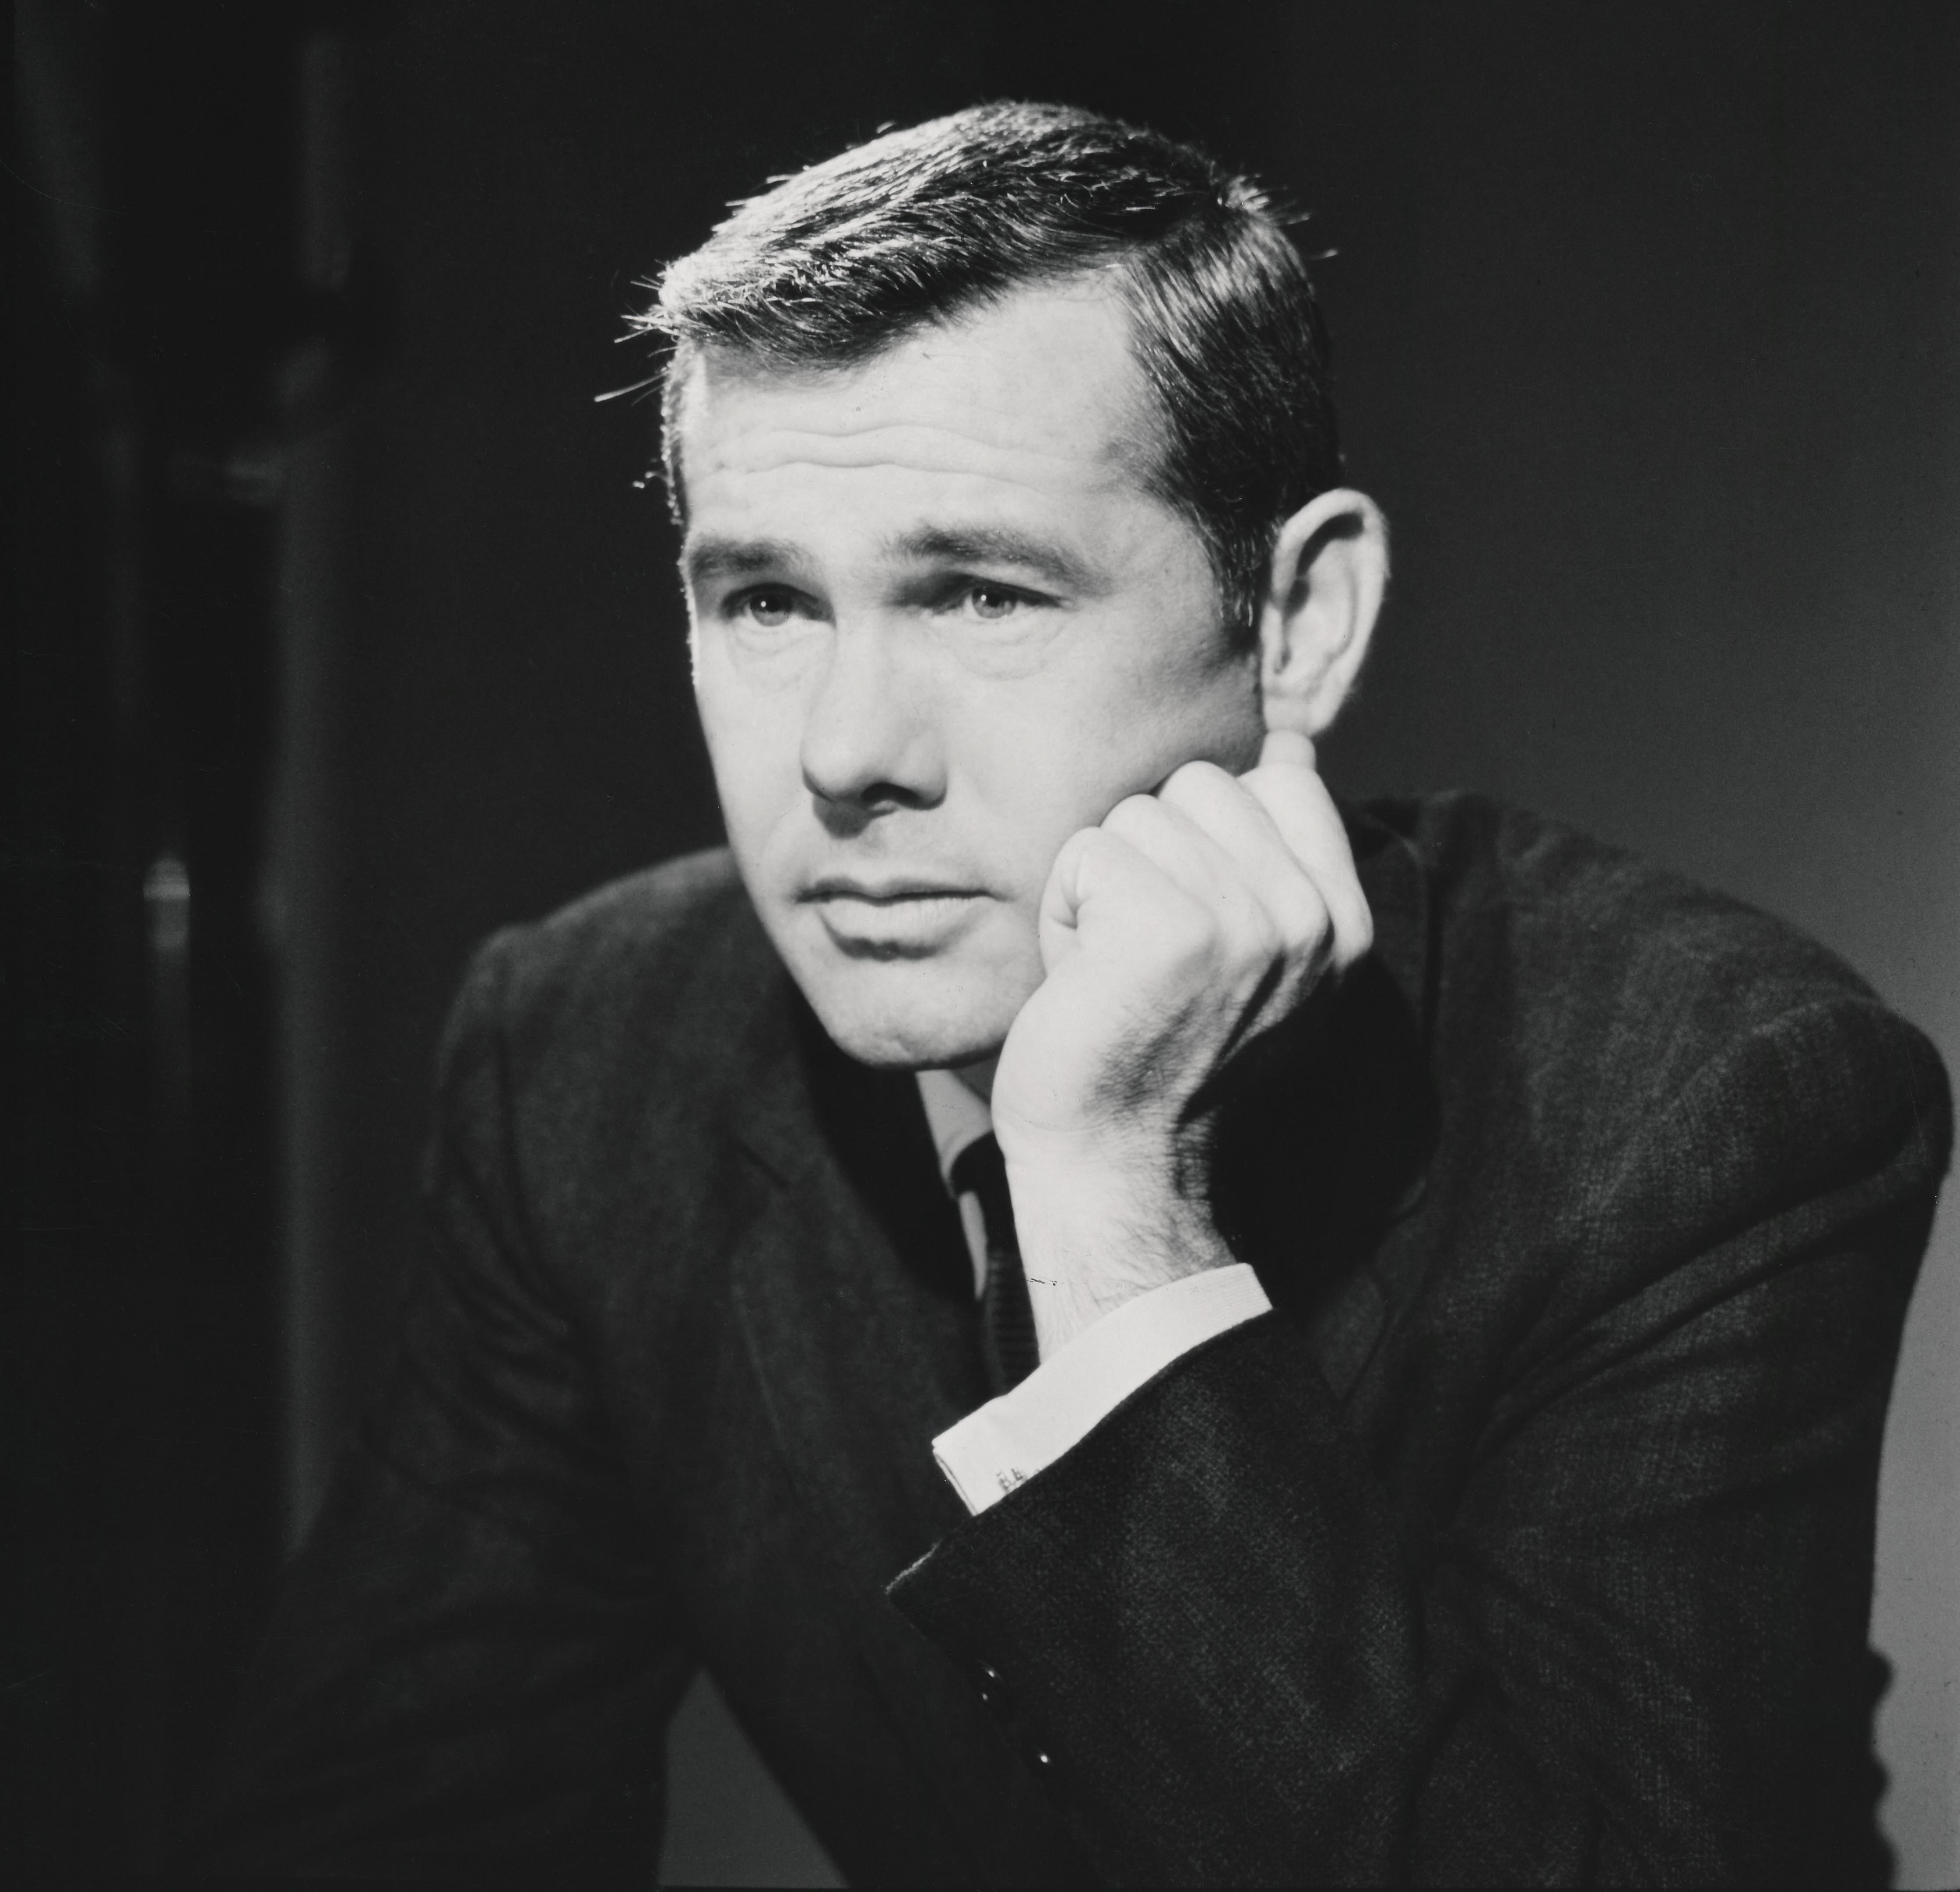 Unknown Black and White Photograph - Johnny Carson "The Tonight Show" Host Fine Art Print